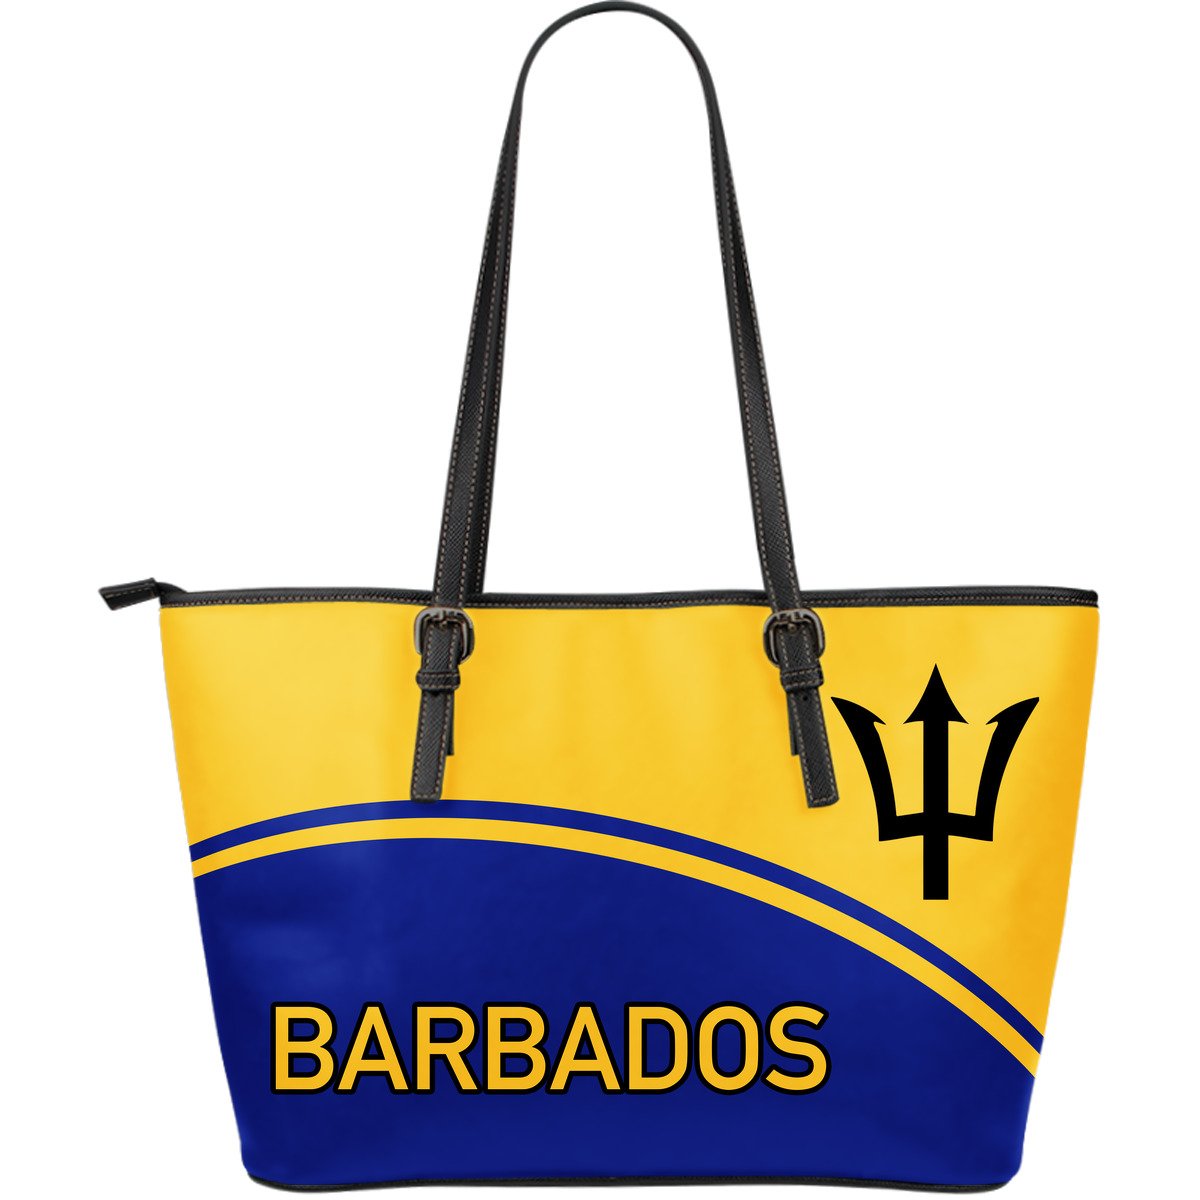 barbados-large-leather-tote-curve-version